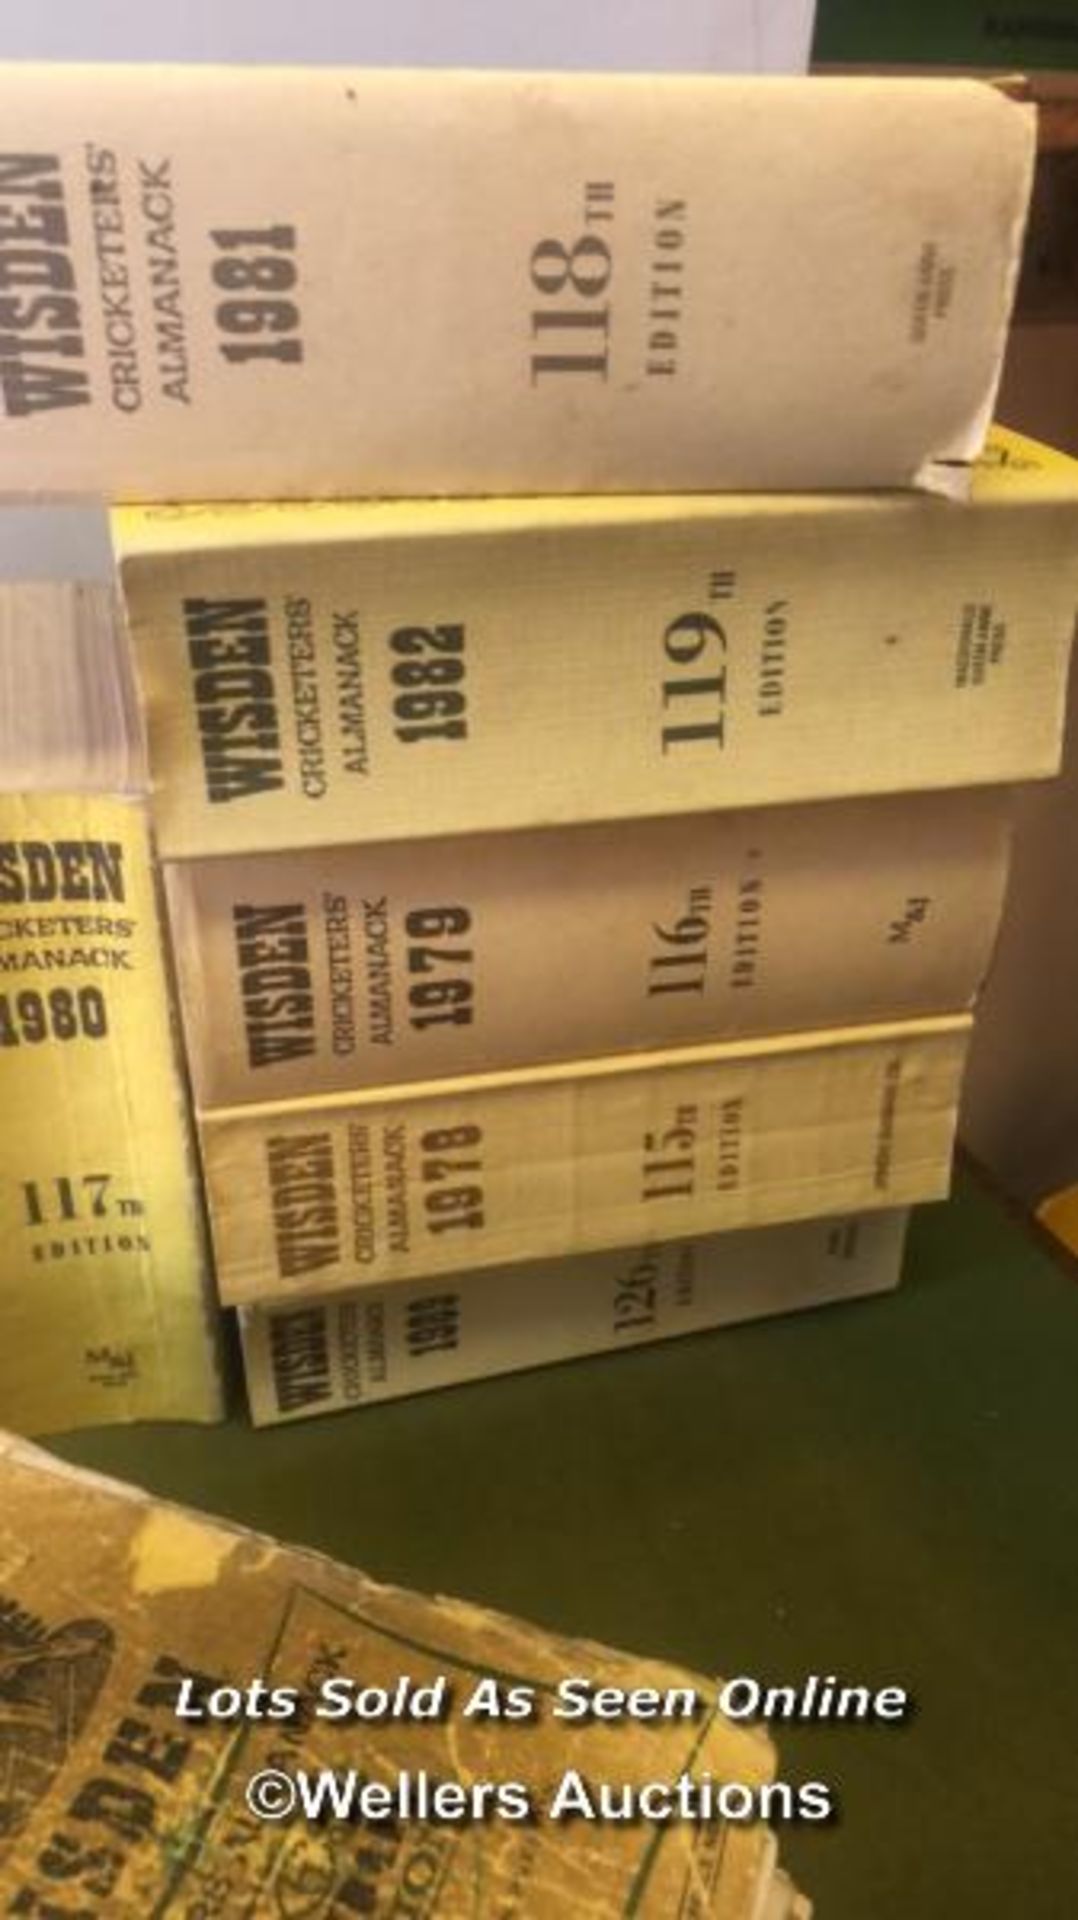 COLLECTION OF WISDEN CRICKET ALMANACK, VARIOUS YEARS, INCLUDING TWO FROM 1963 - Image 6 of 6